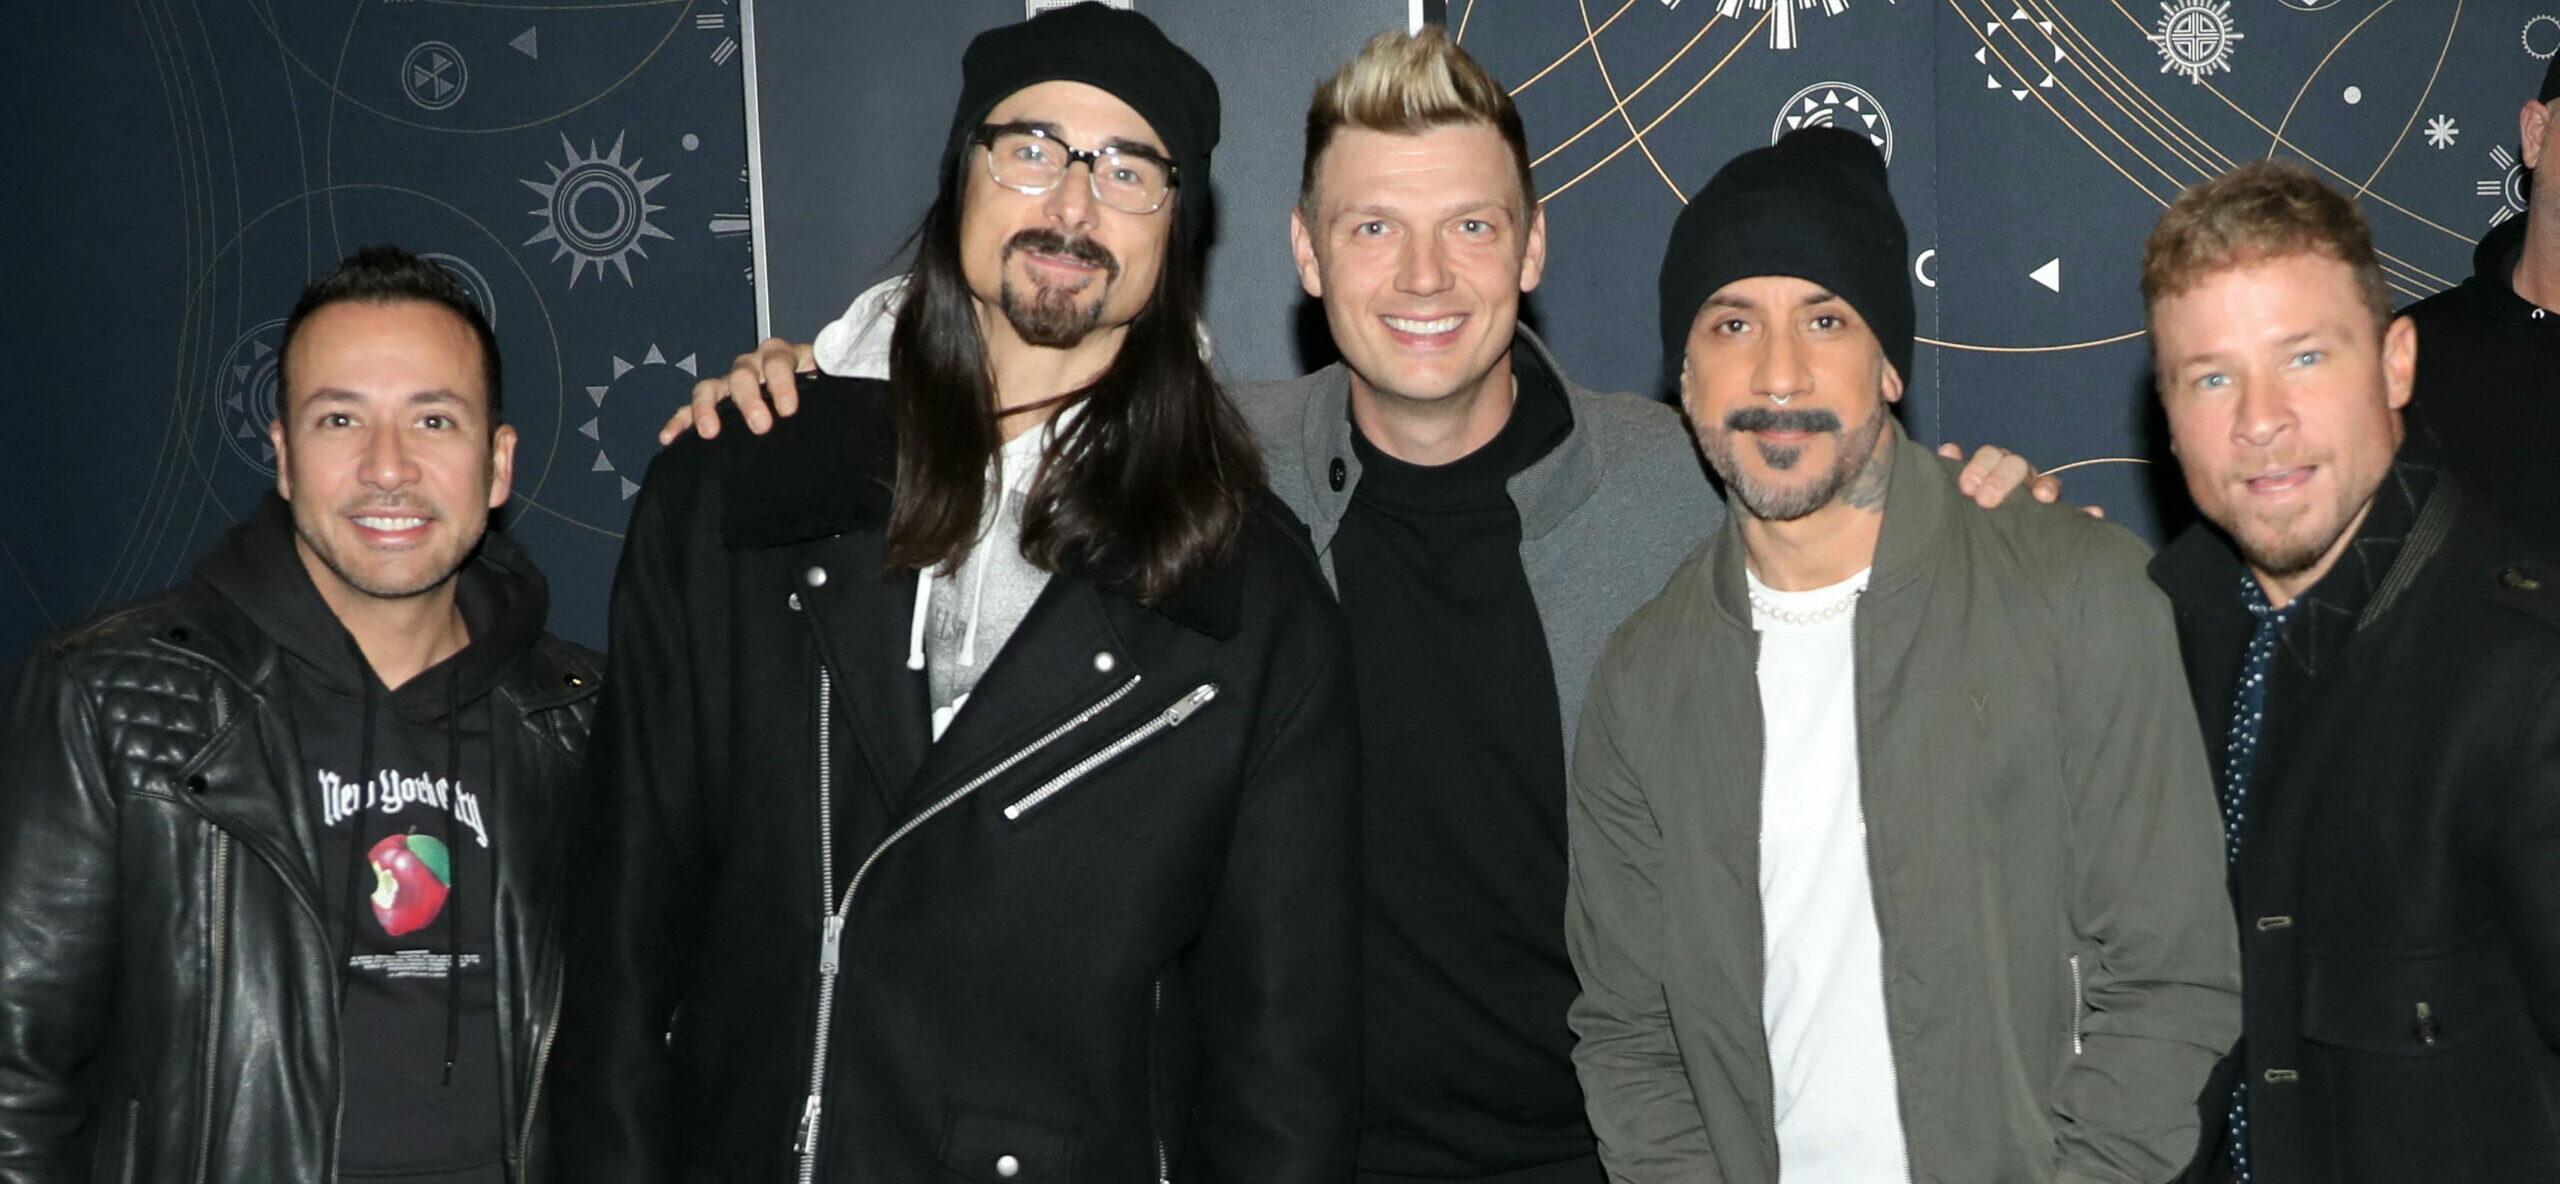 Backstreet Boys at the Empire state Building